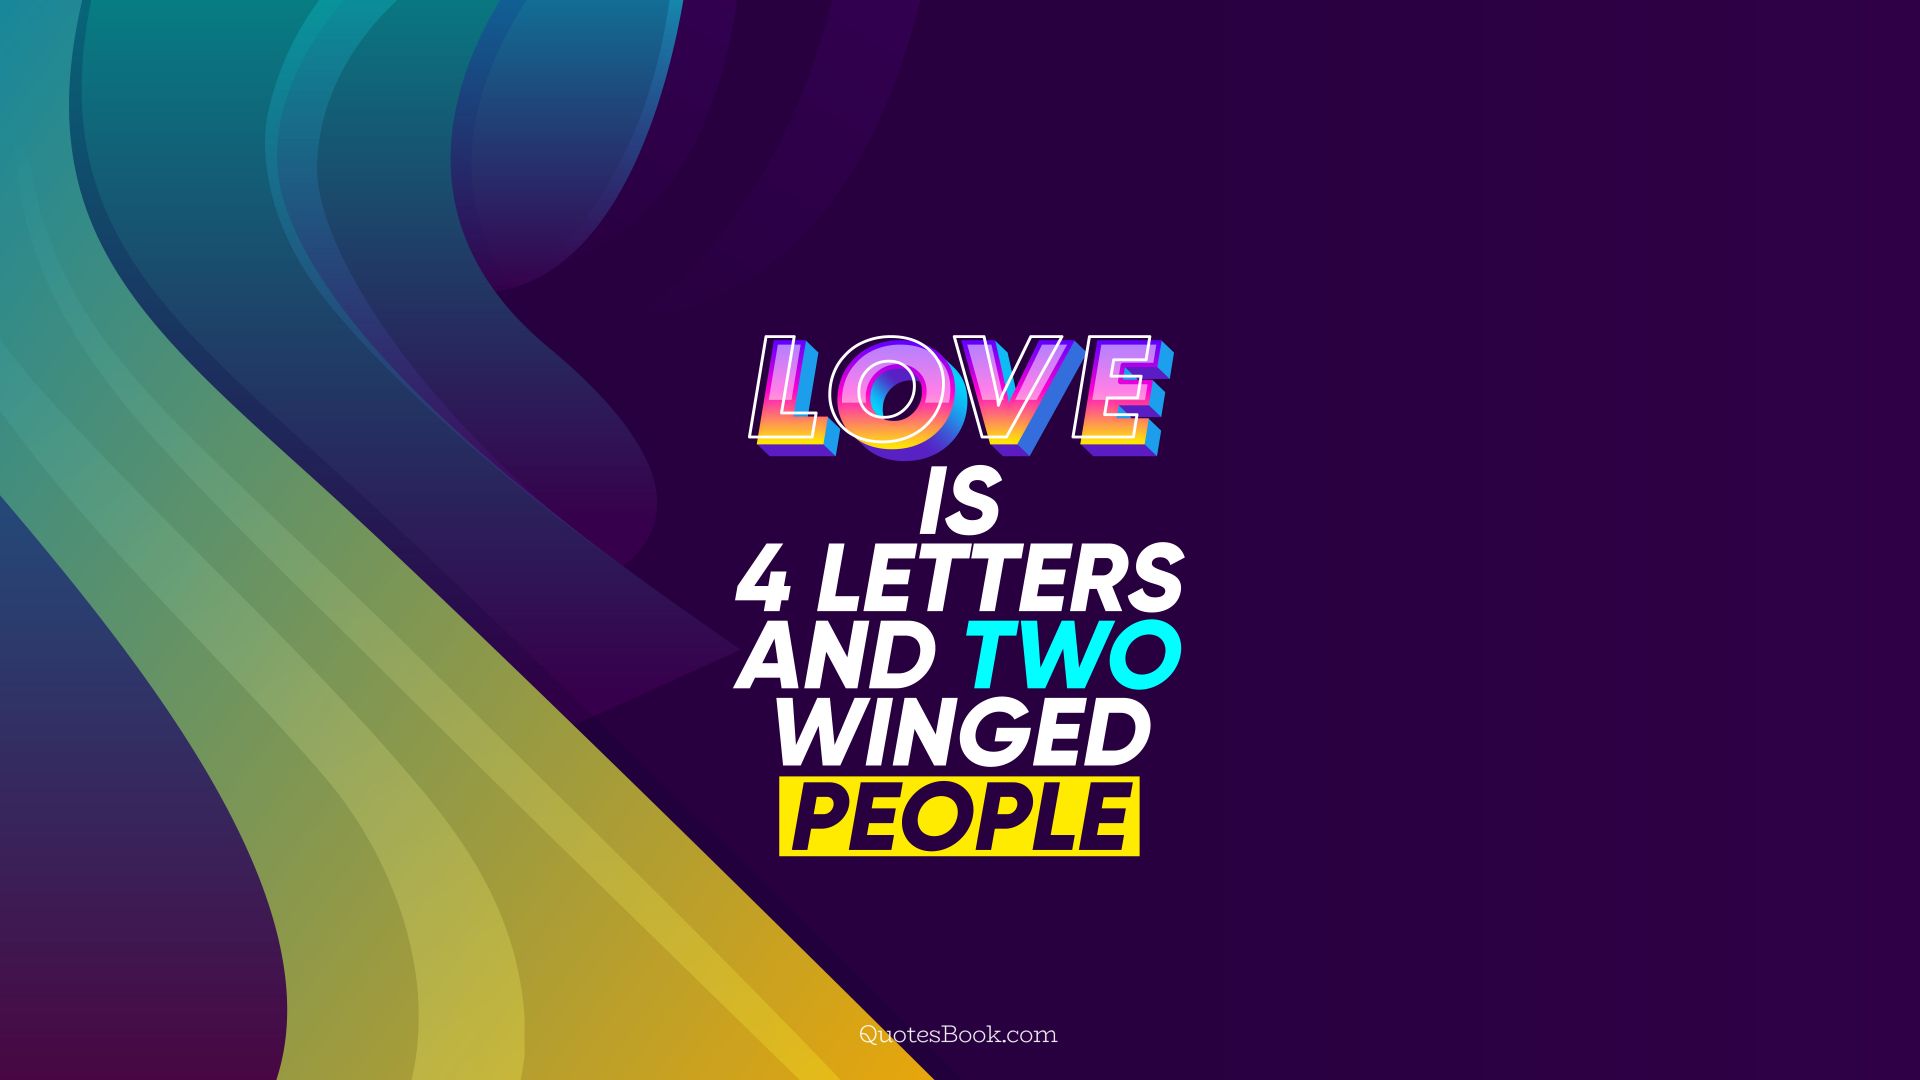 Love is 4 letters and two winged people. - Quote by QuotesBook